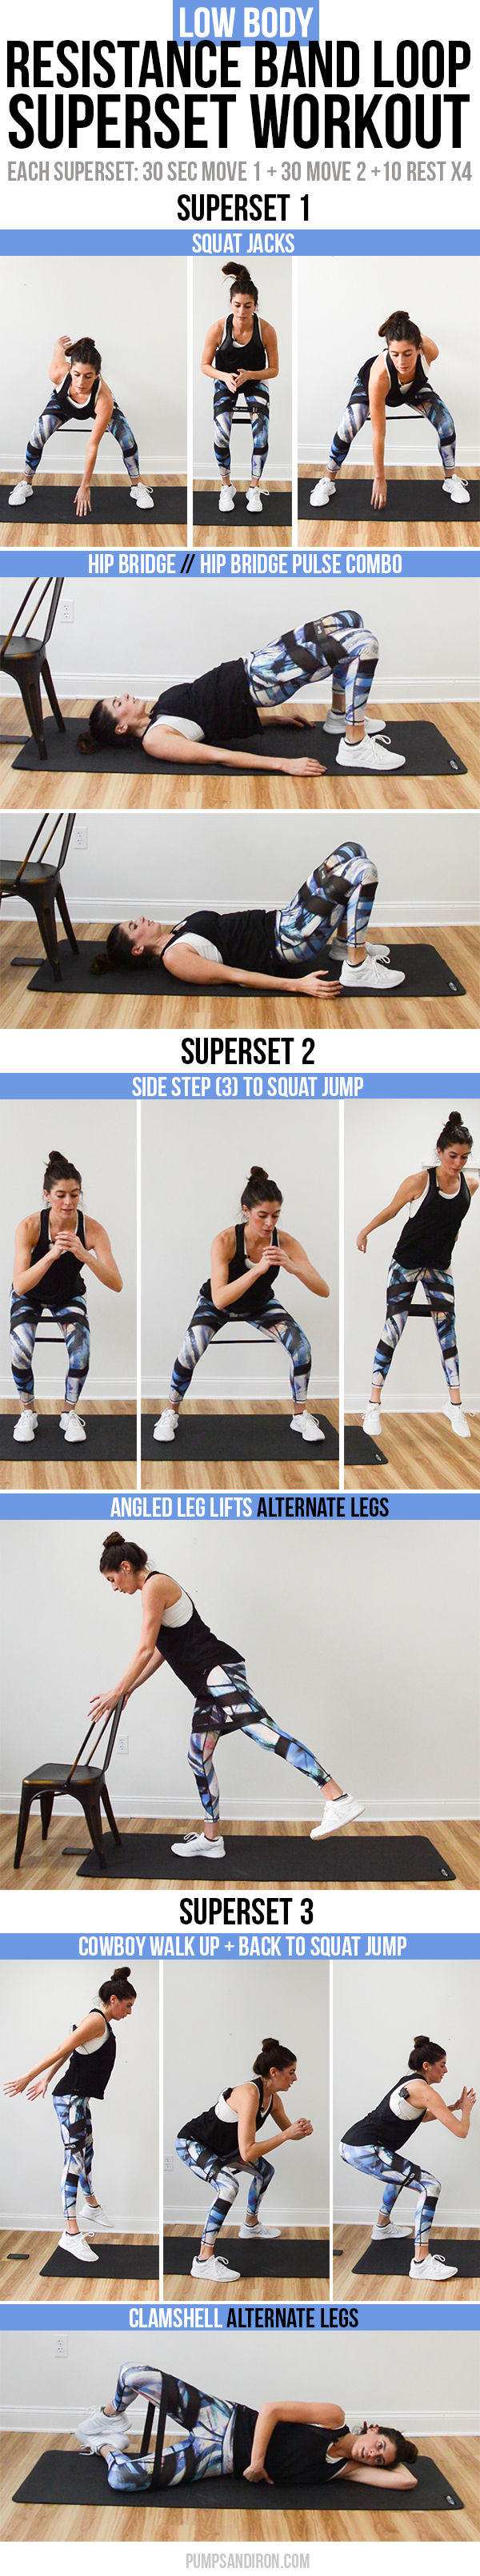 Resistance Band Leg Workout for Strong Lower Body